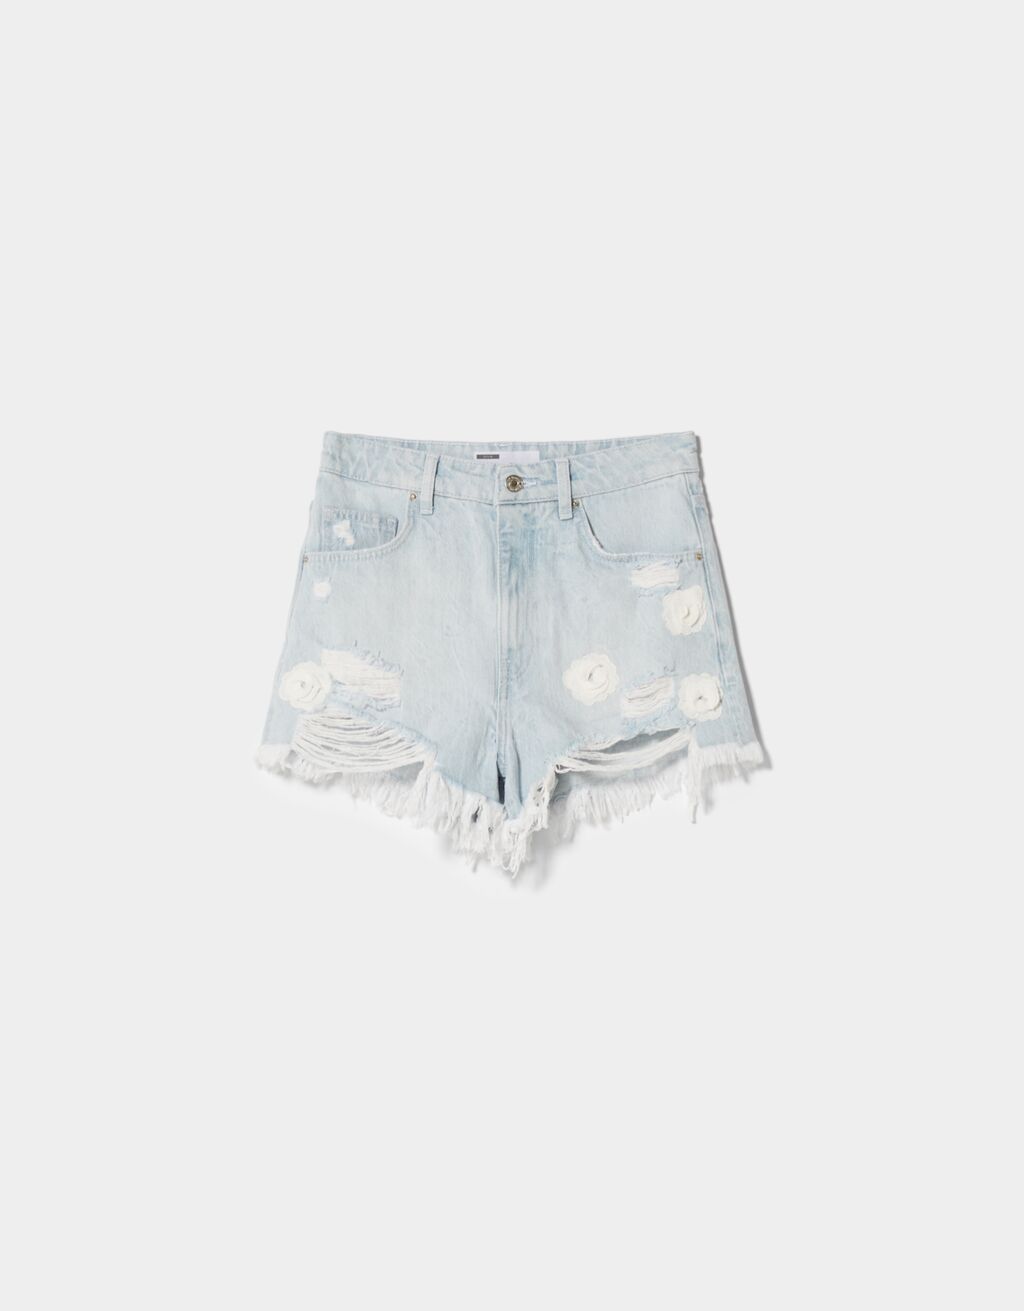 Ripped denim floral shorts